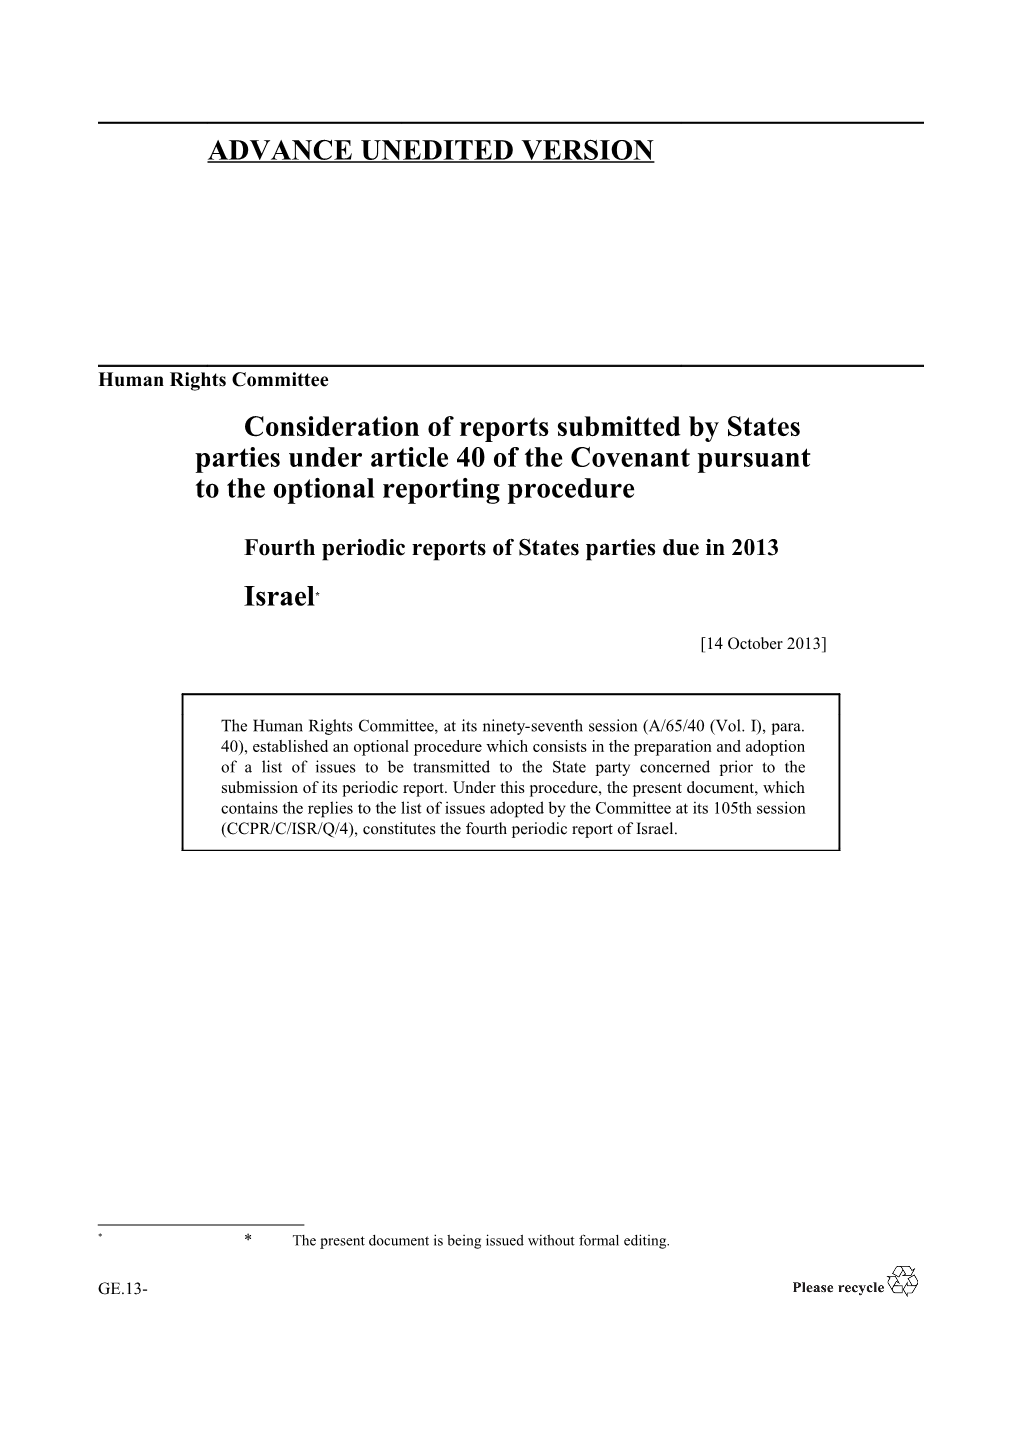 Fourth Periodic Reports of States Partiesdue in 2013